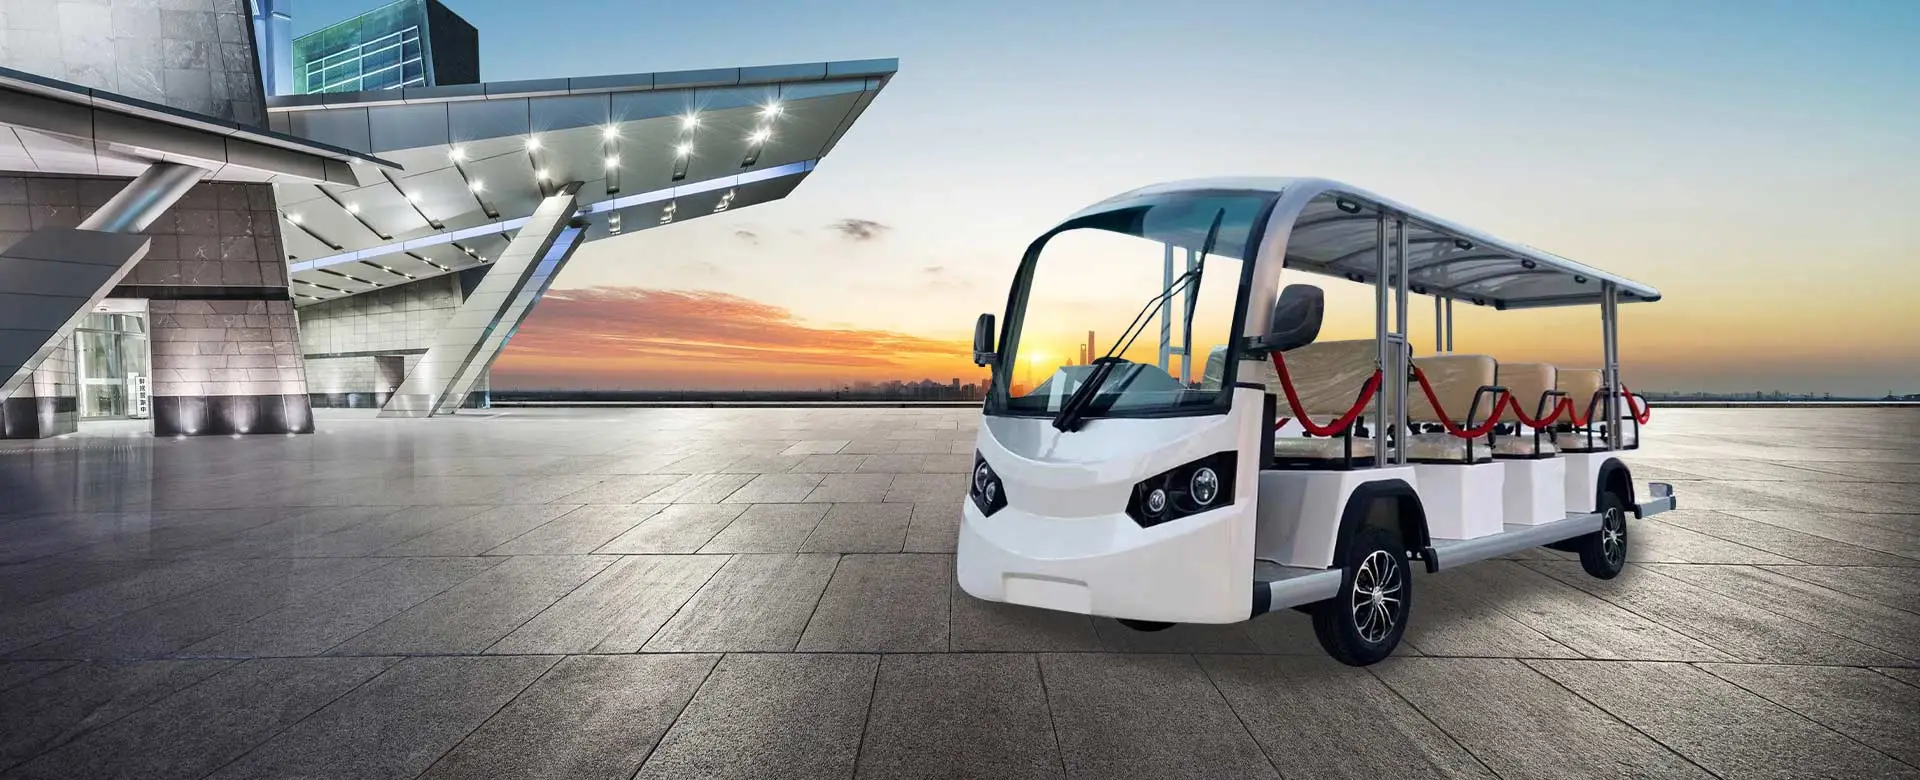 Electric Shuttle Bus Covering 8-23 Seater with Open and Enclosed Models